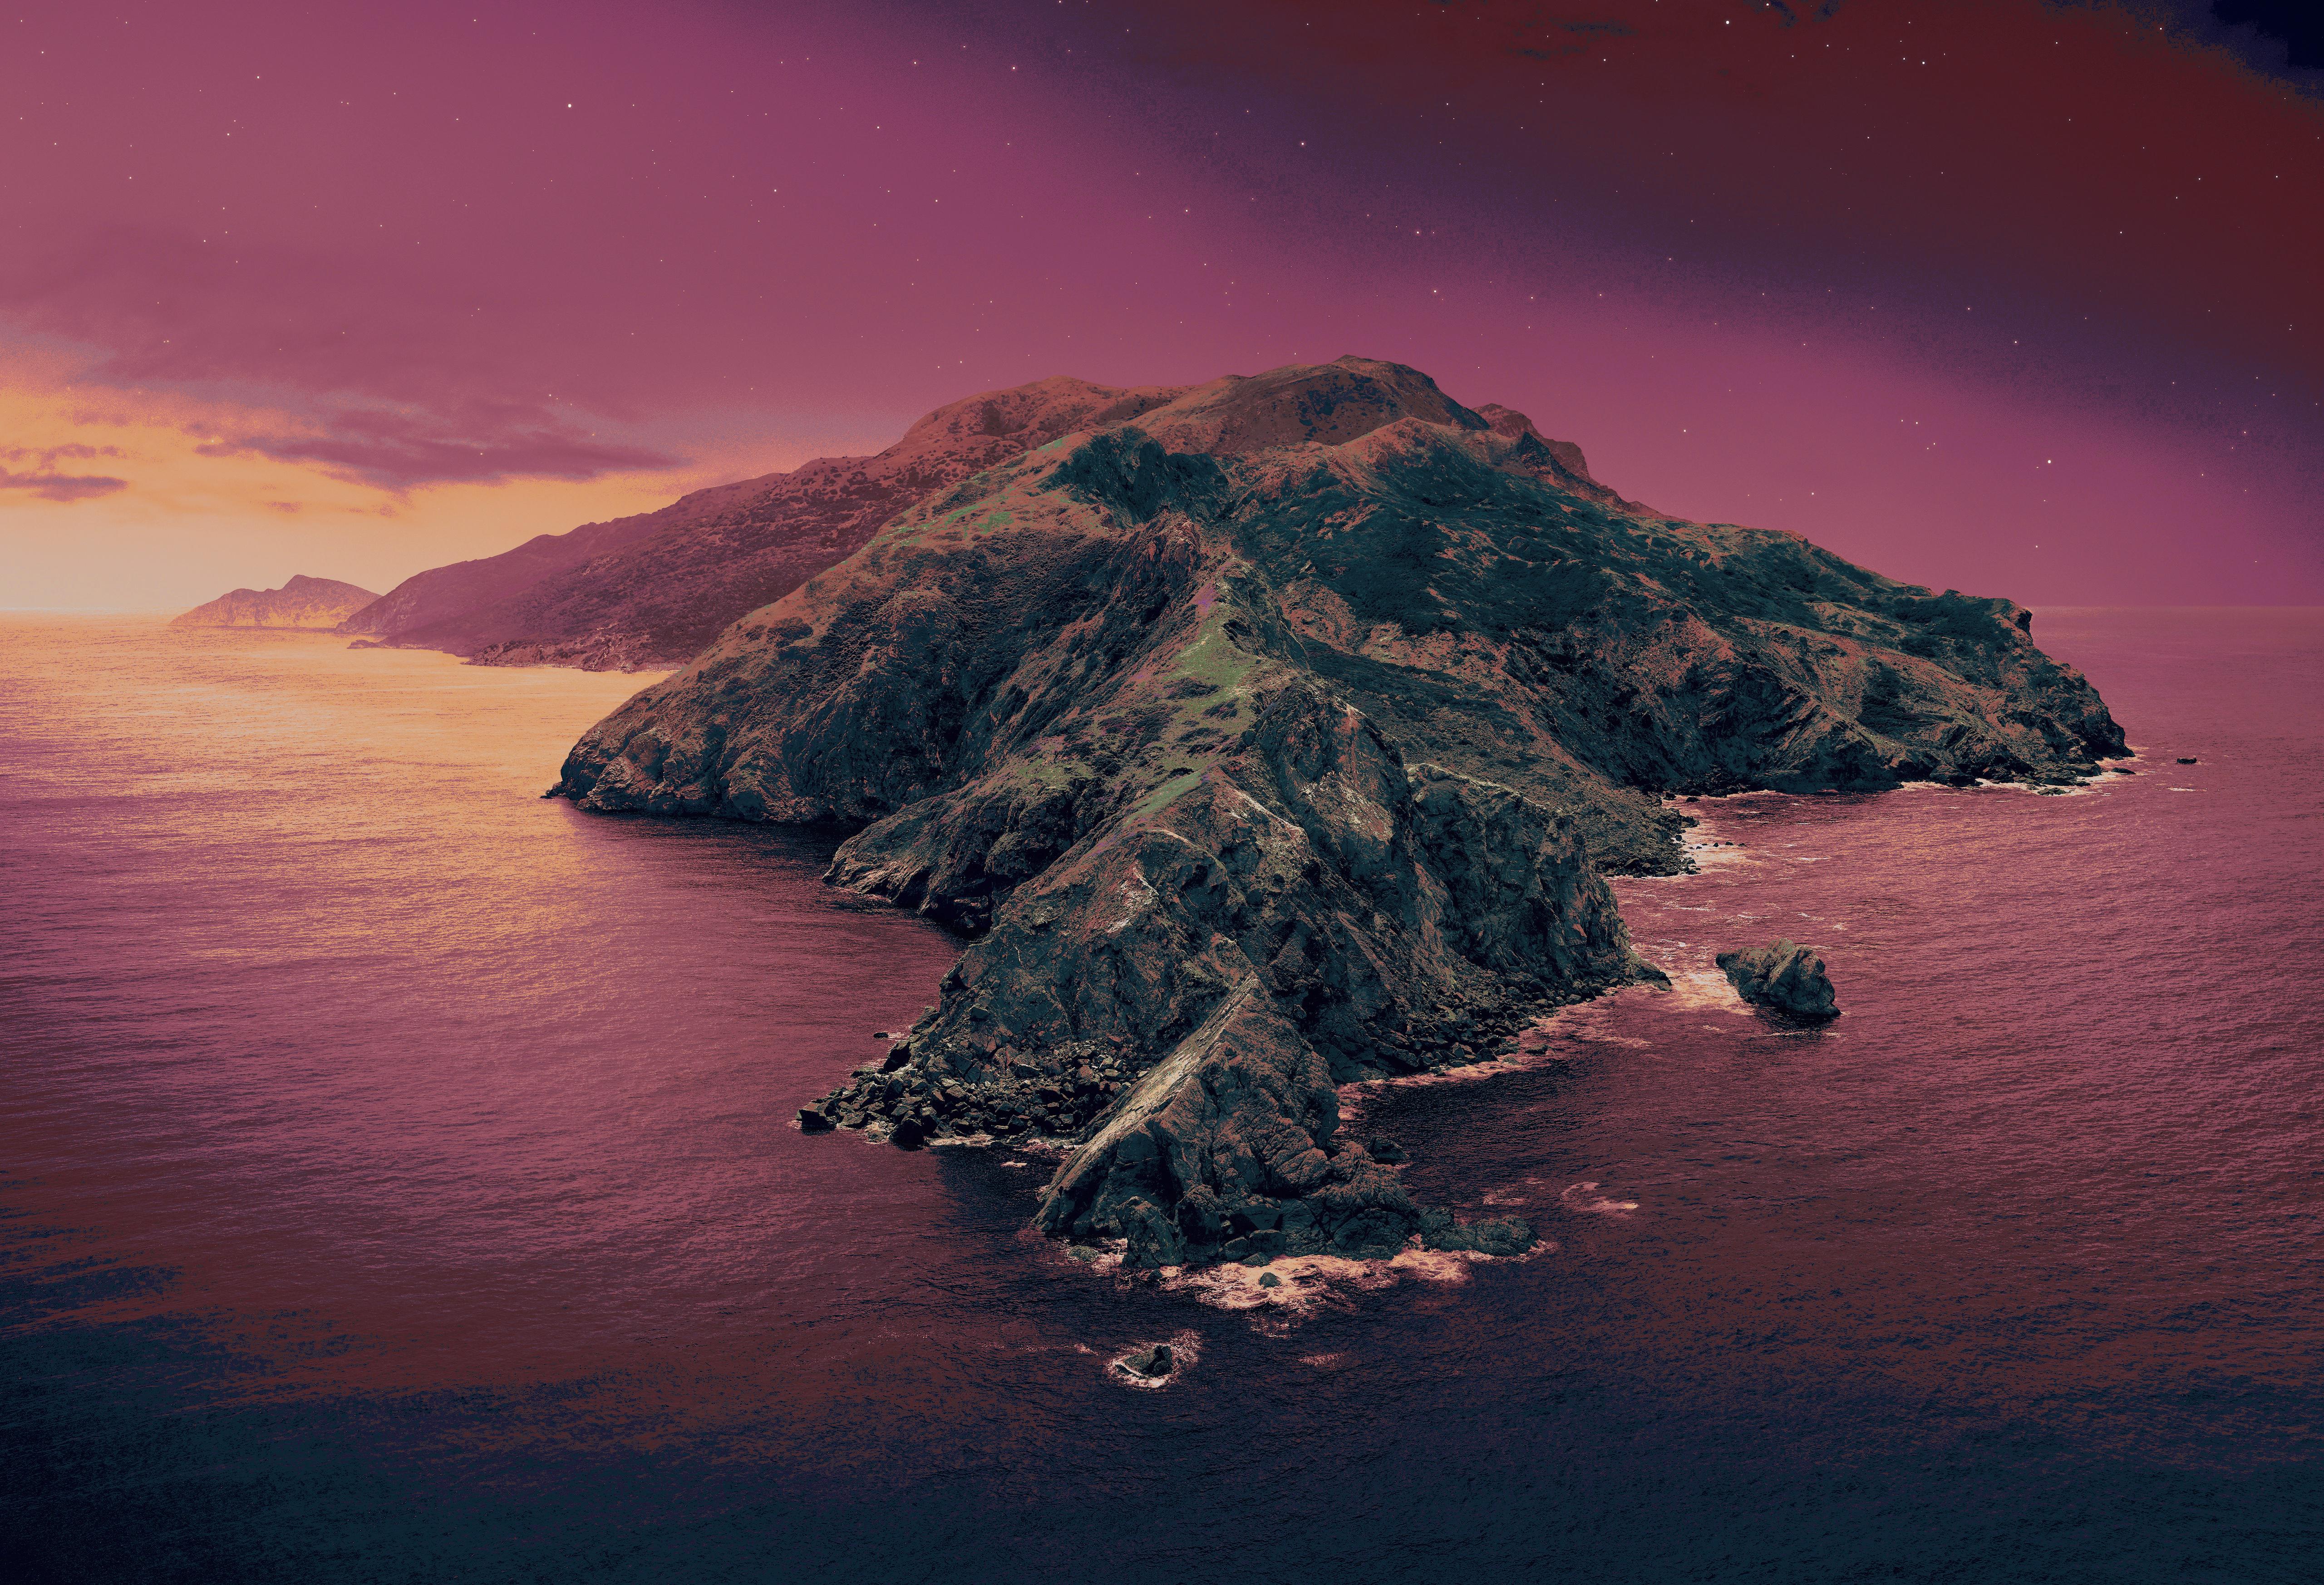 Catalina 4k Wallpapers For Your Desktop Or Mobile Screen Free And Easy To Download